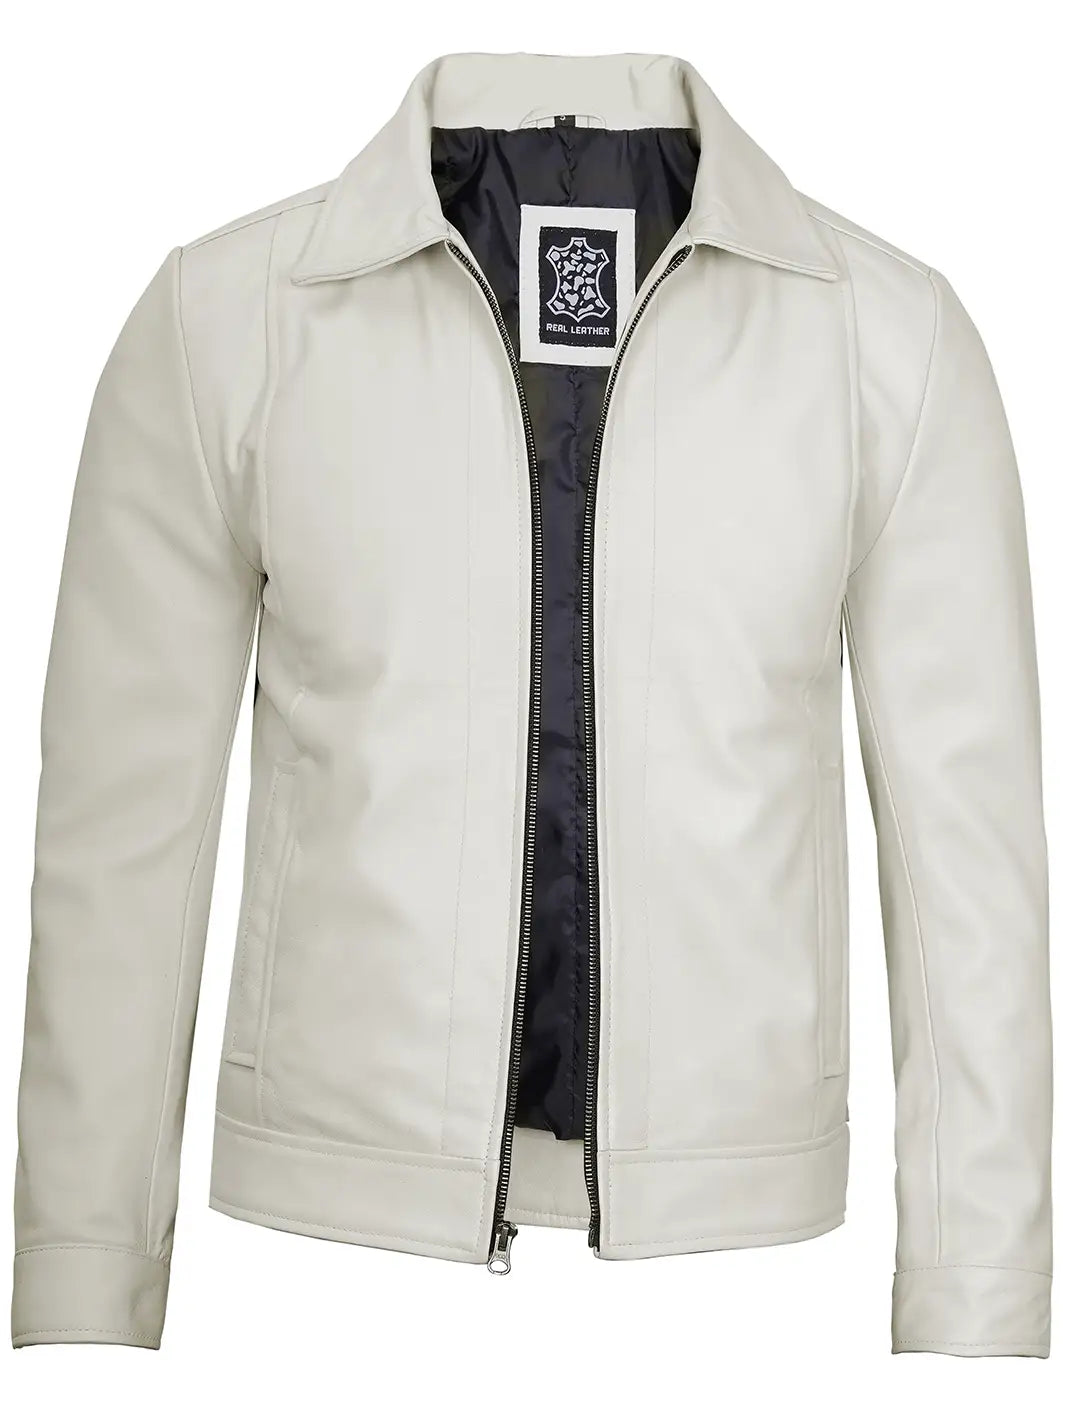 Mens off white leather jacket